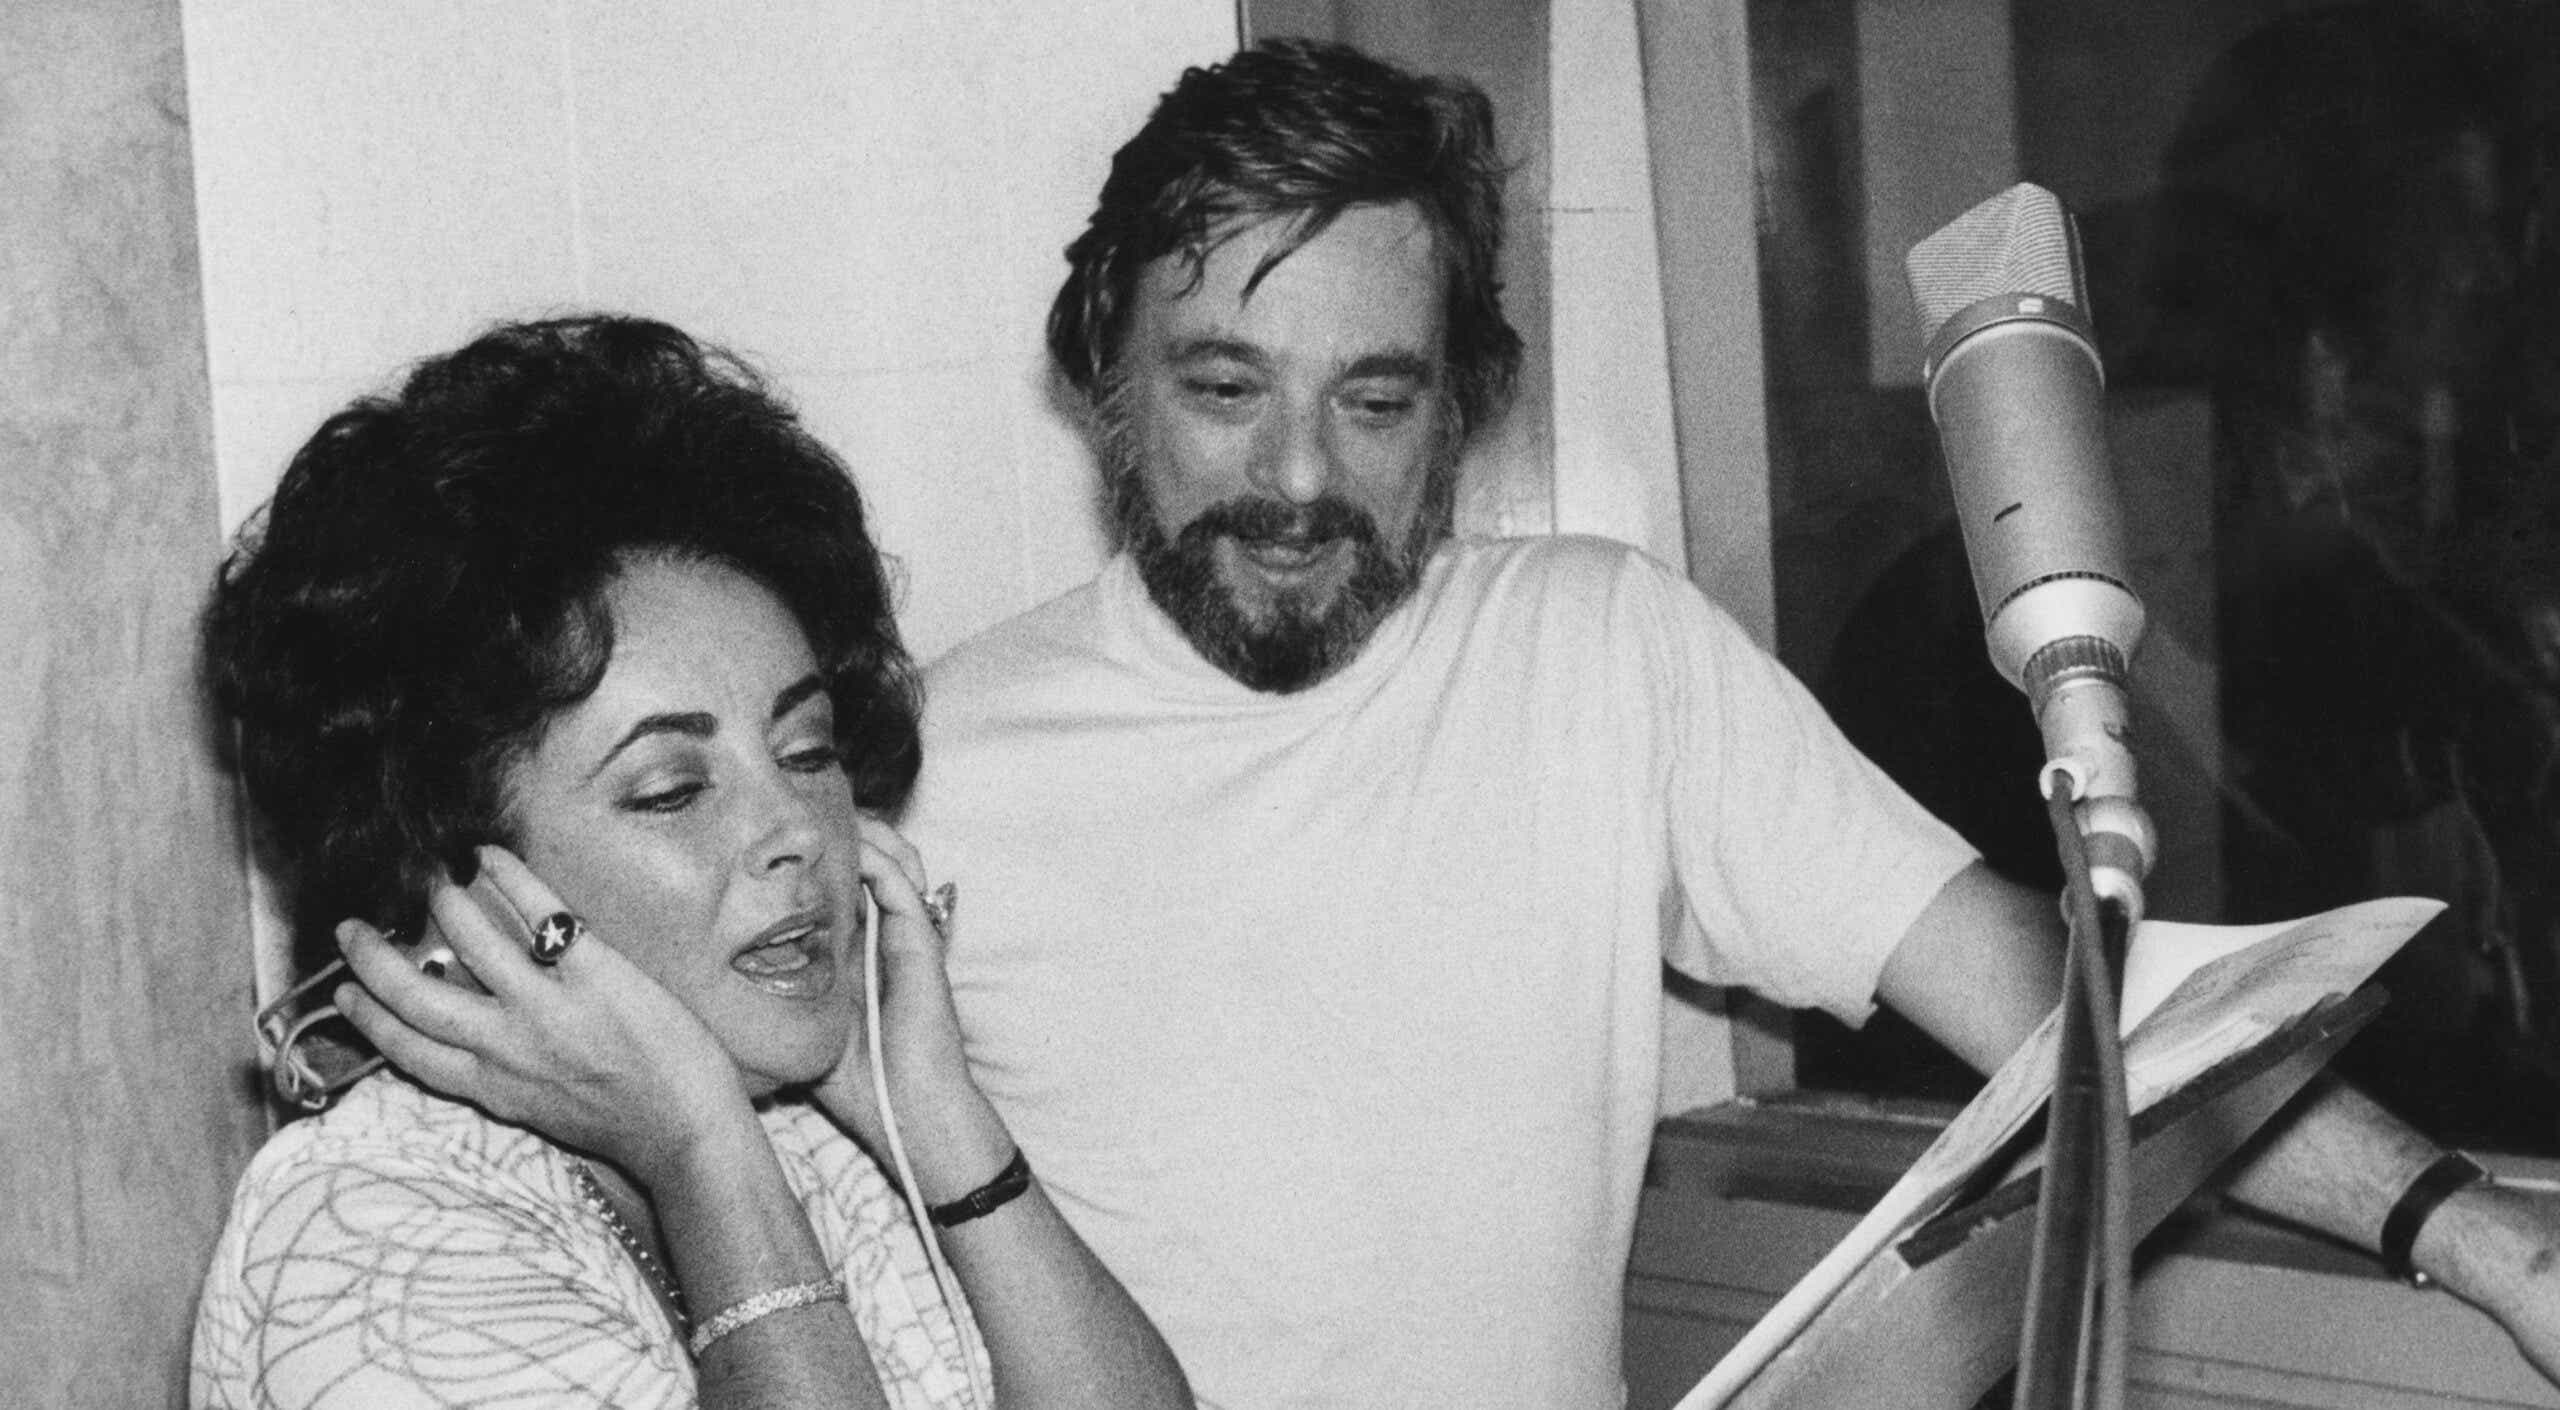 Elizabeth Taylor at a Wembley studio with Stephen Sondheim, to record the songs for the film 'A Little Night Music',